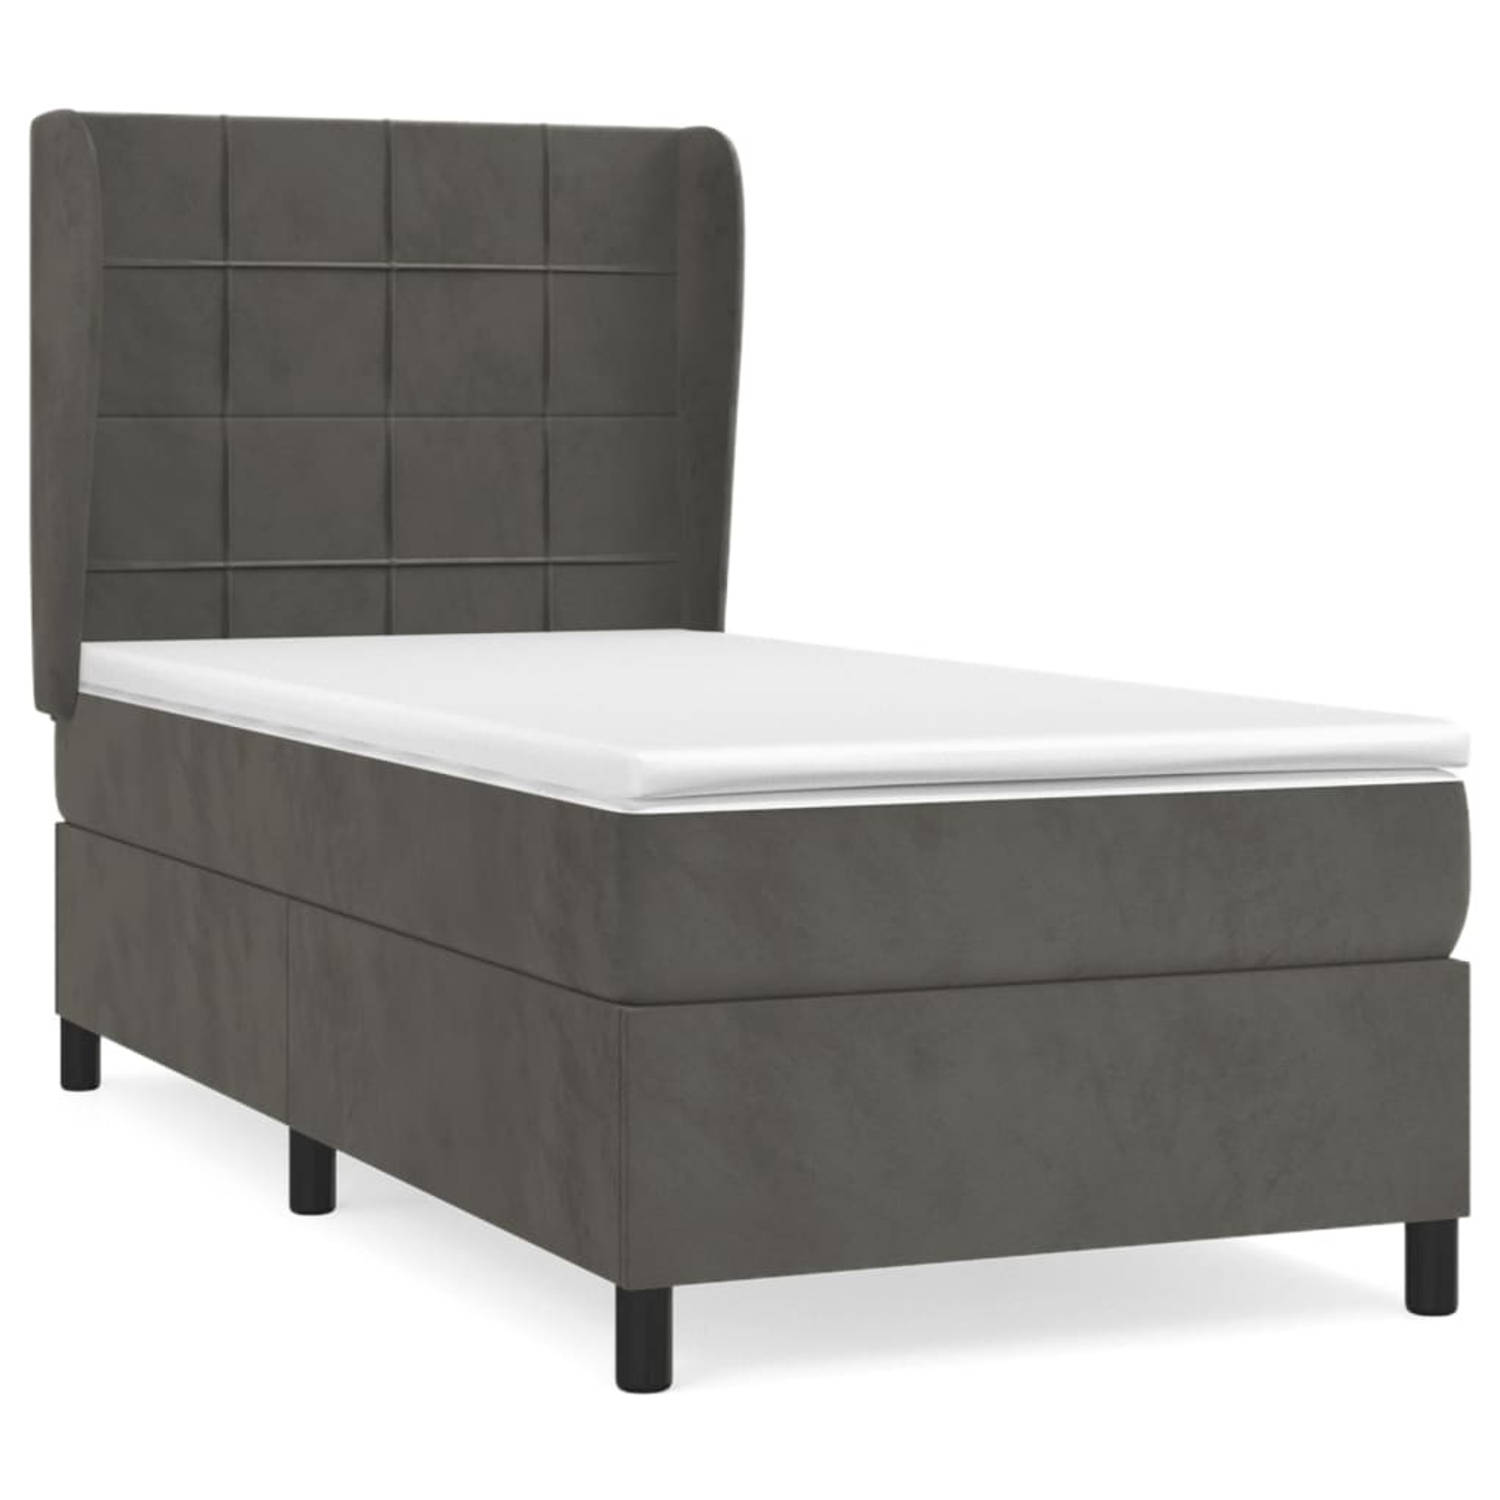 The Living Store Boxspringbed - Fluweel - 203 x 103 x 118/128 cm - Donkergrijs